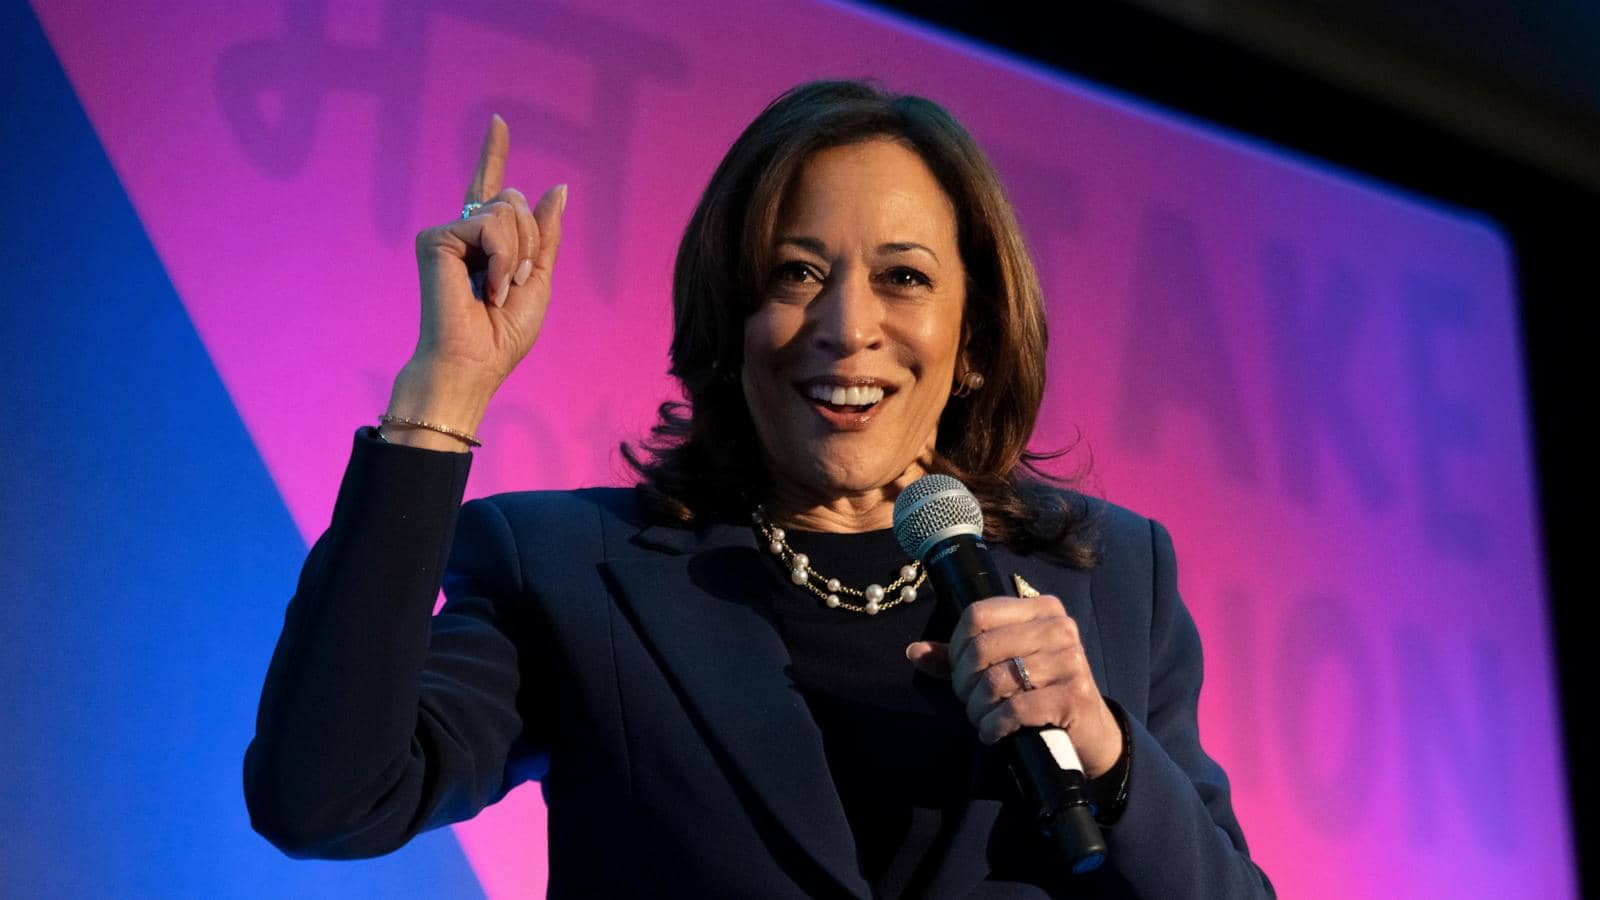 Harris accepts debate invite from CBS News to face off with Trump’s VP pick this summer